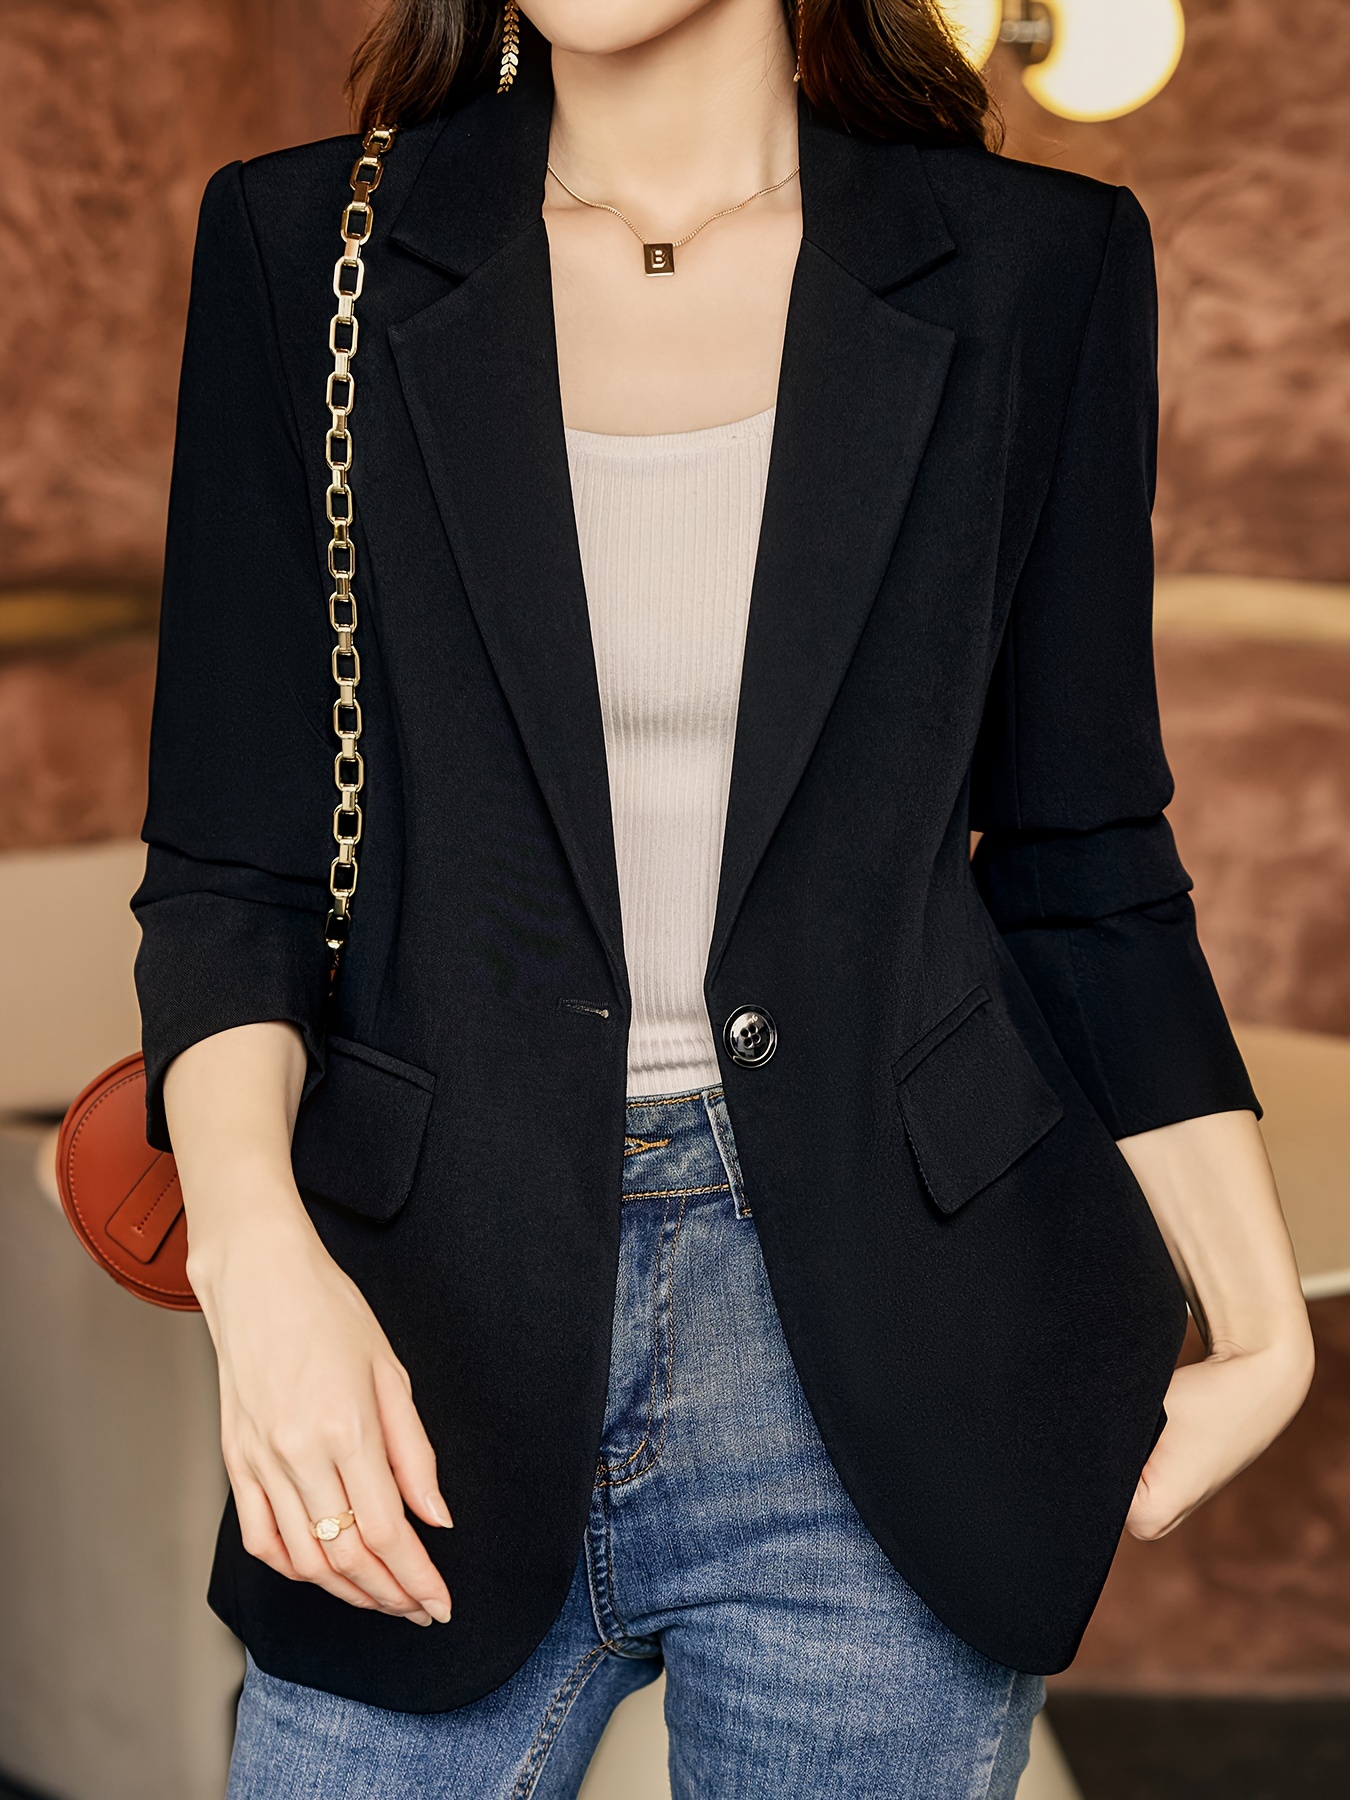 Notched Collar Button Front Blazer, Elegant Long Sleeve Blazer For Office & Work, Women s Clothing details 7